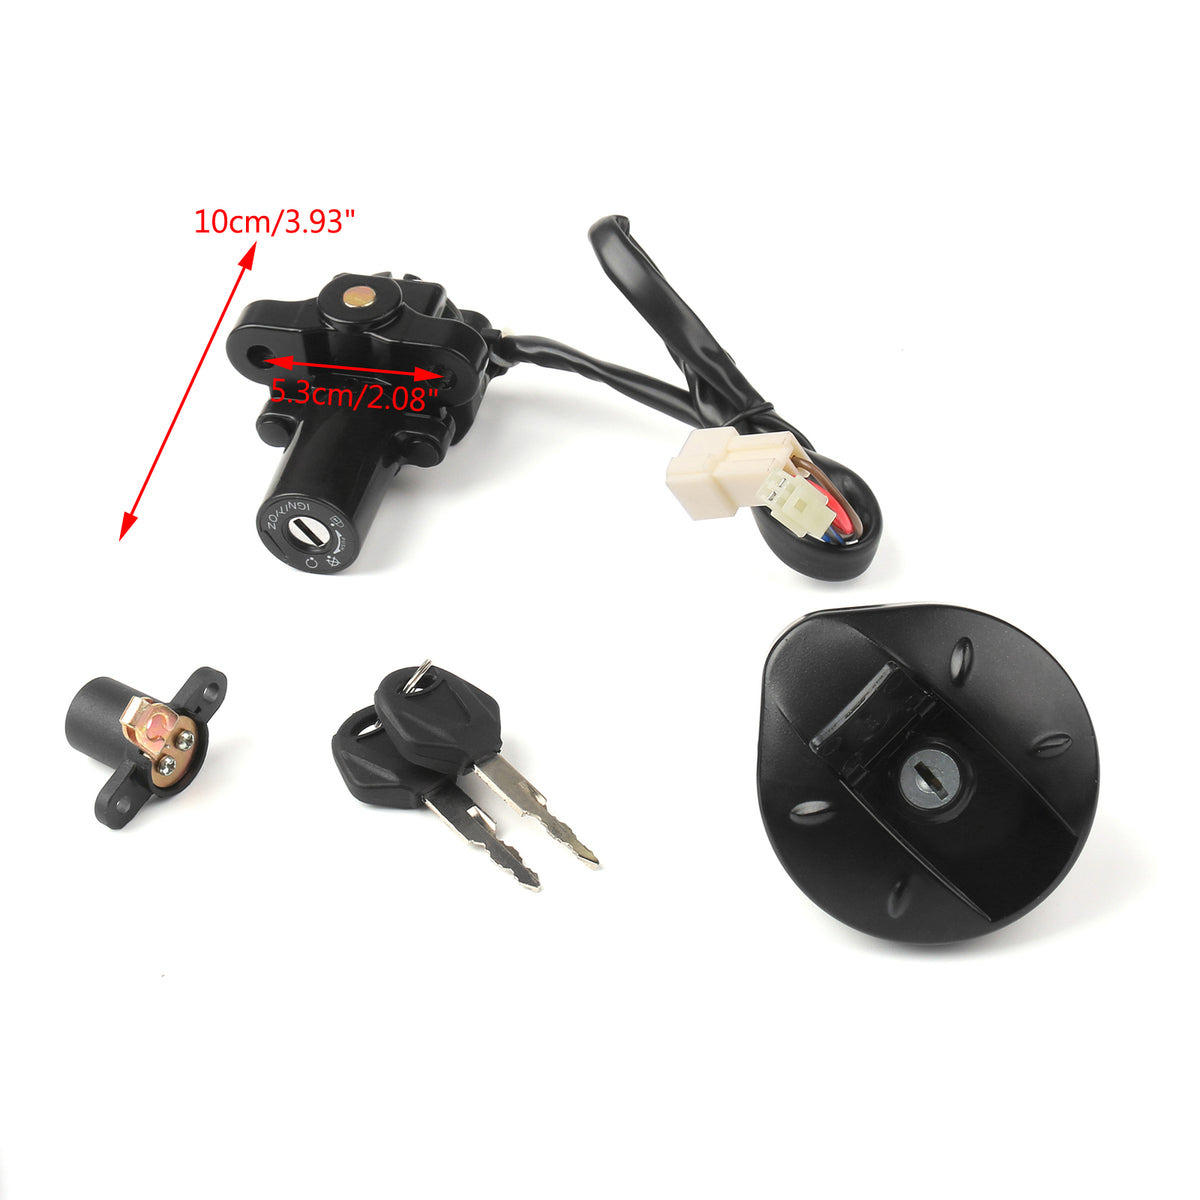 Ignition Switch Seat Gas Cap Cover Lock Key Set For Yamaha XT660 XT660 R/X 04-11